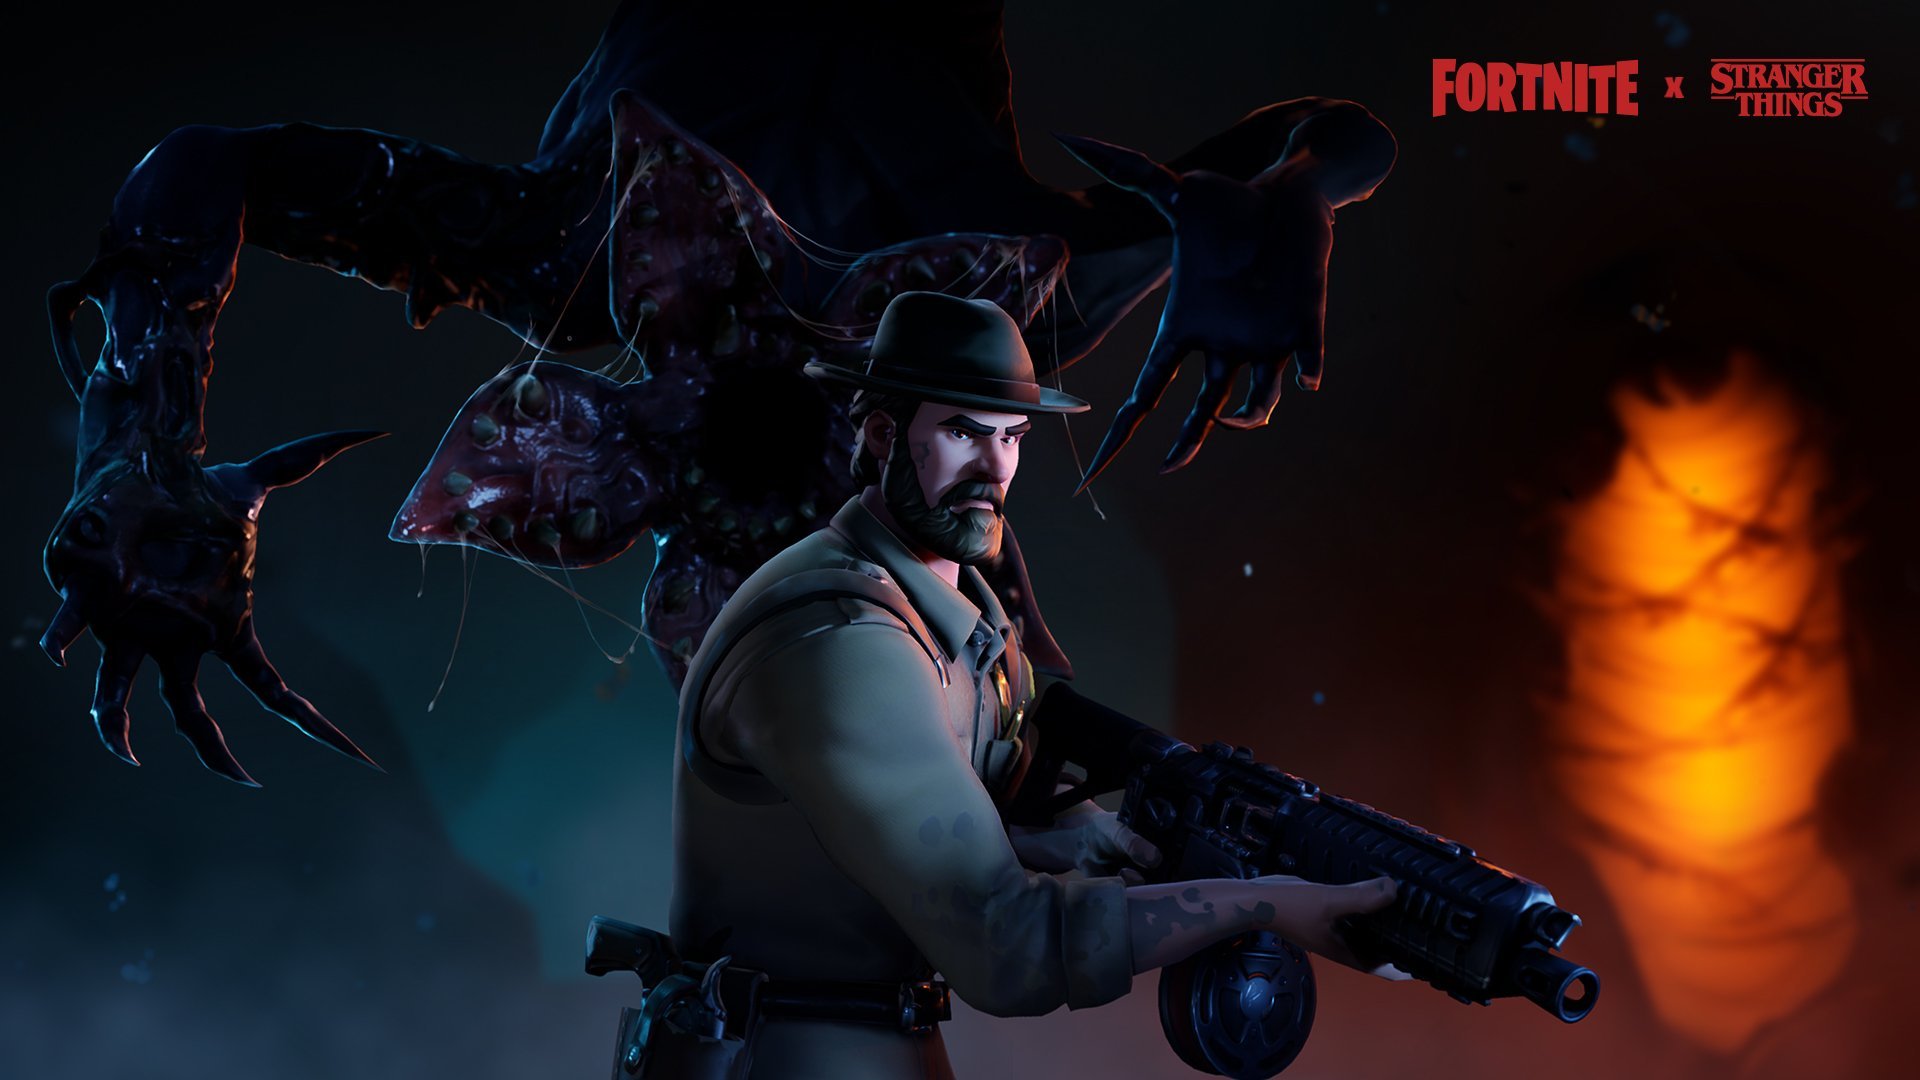 Fortnites crossover with Stranger Things adds Demogorgon and 1920x1080